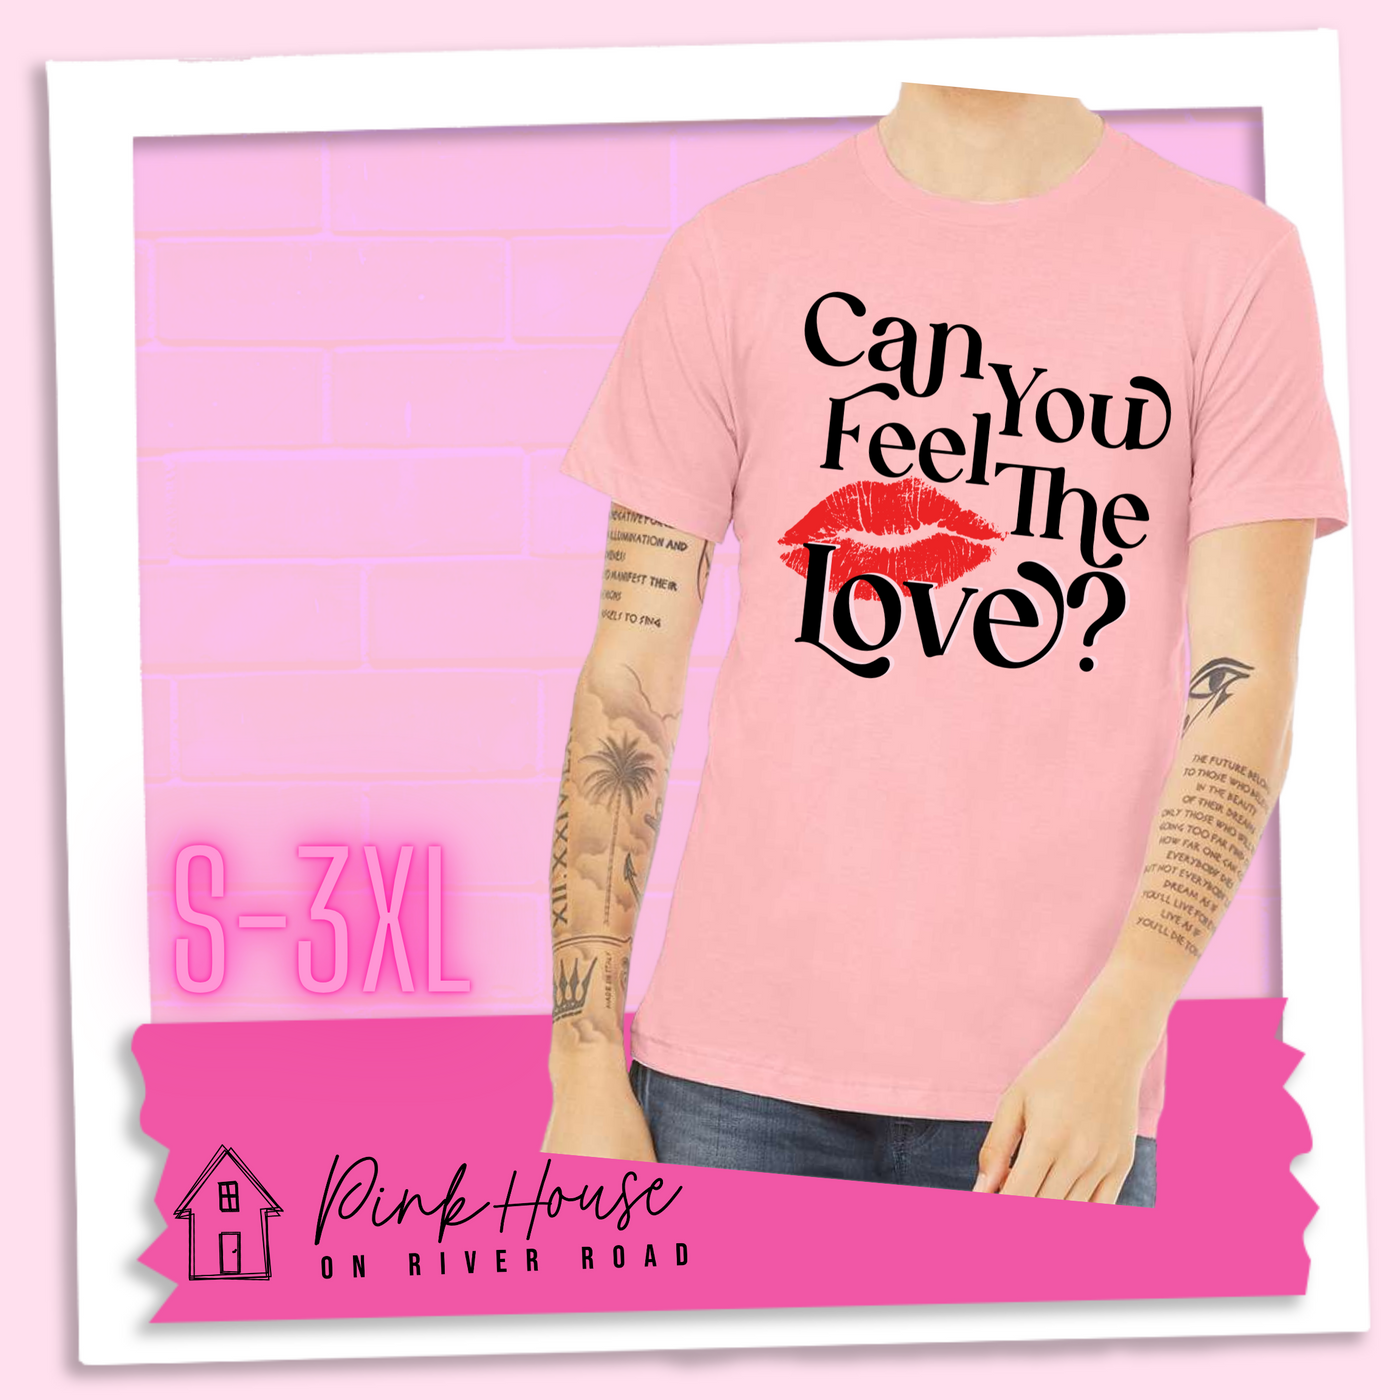 Pink Jersey Tee that says "Can you feel the love?" with a pair of red lips